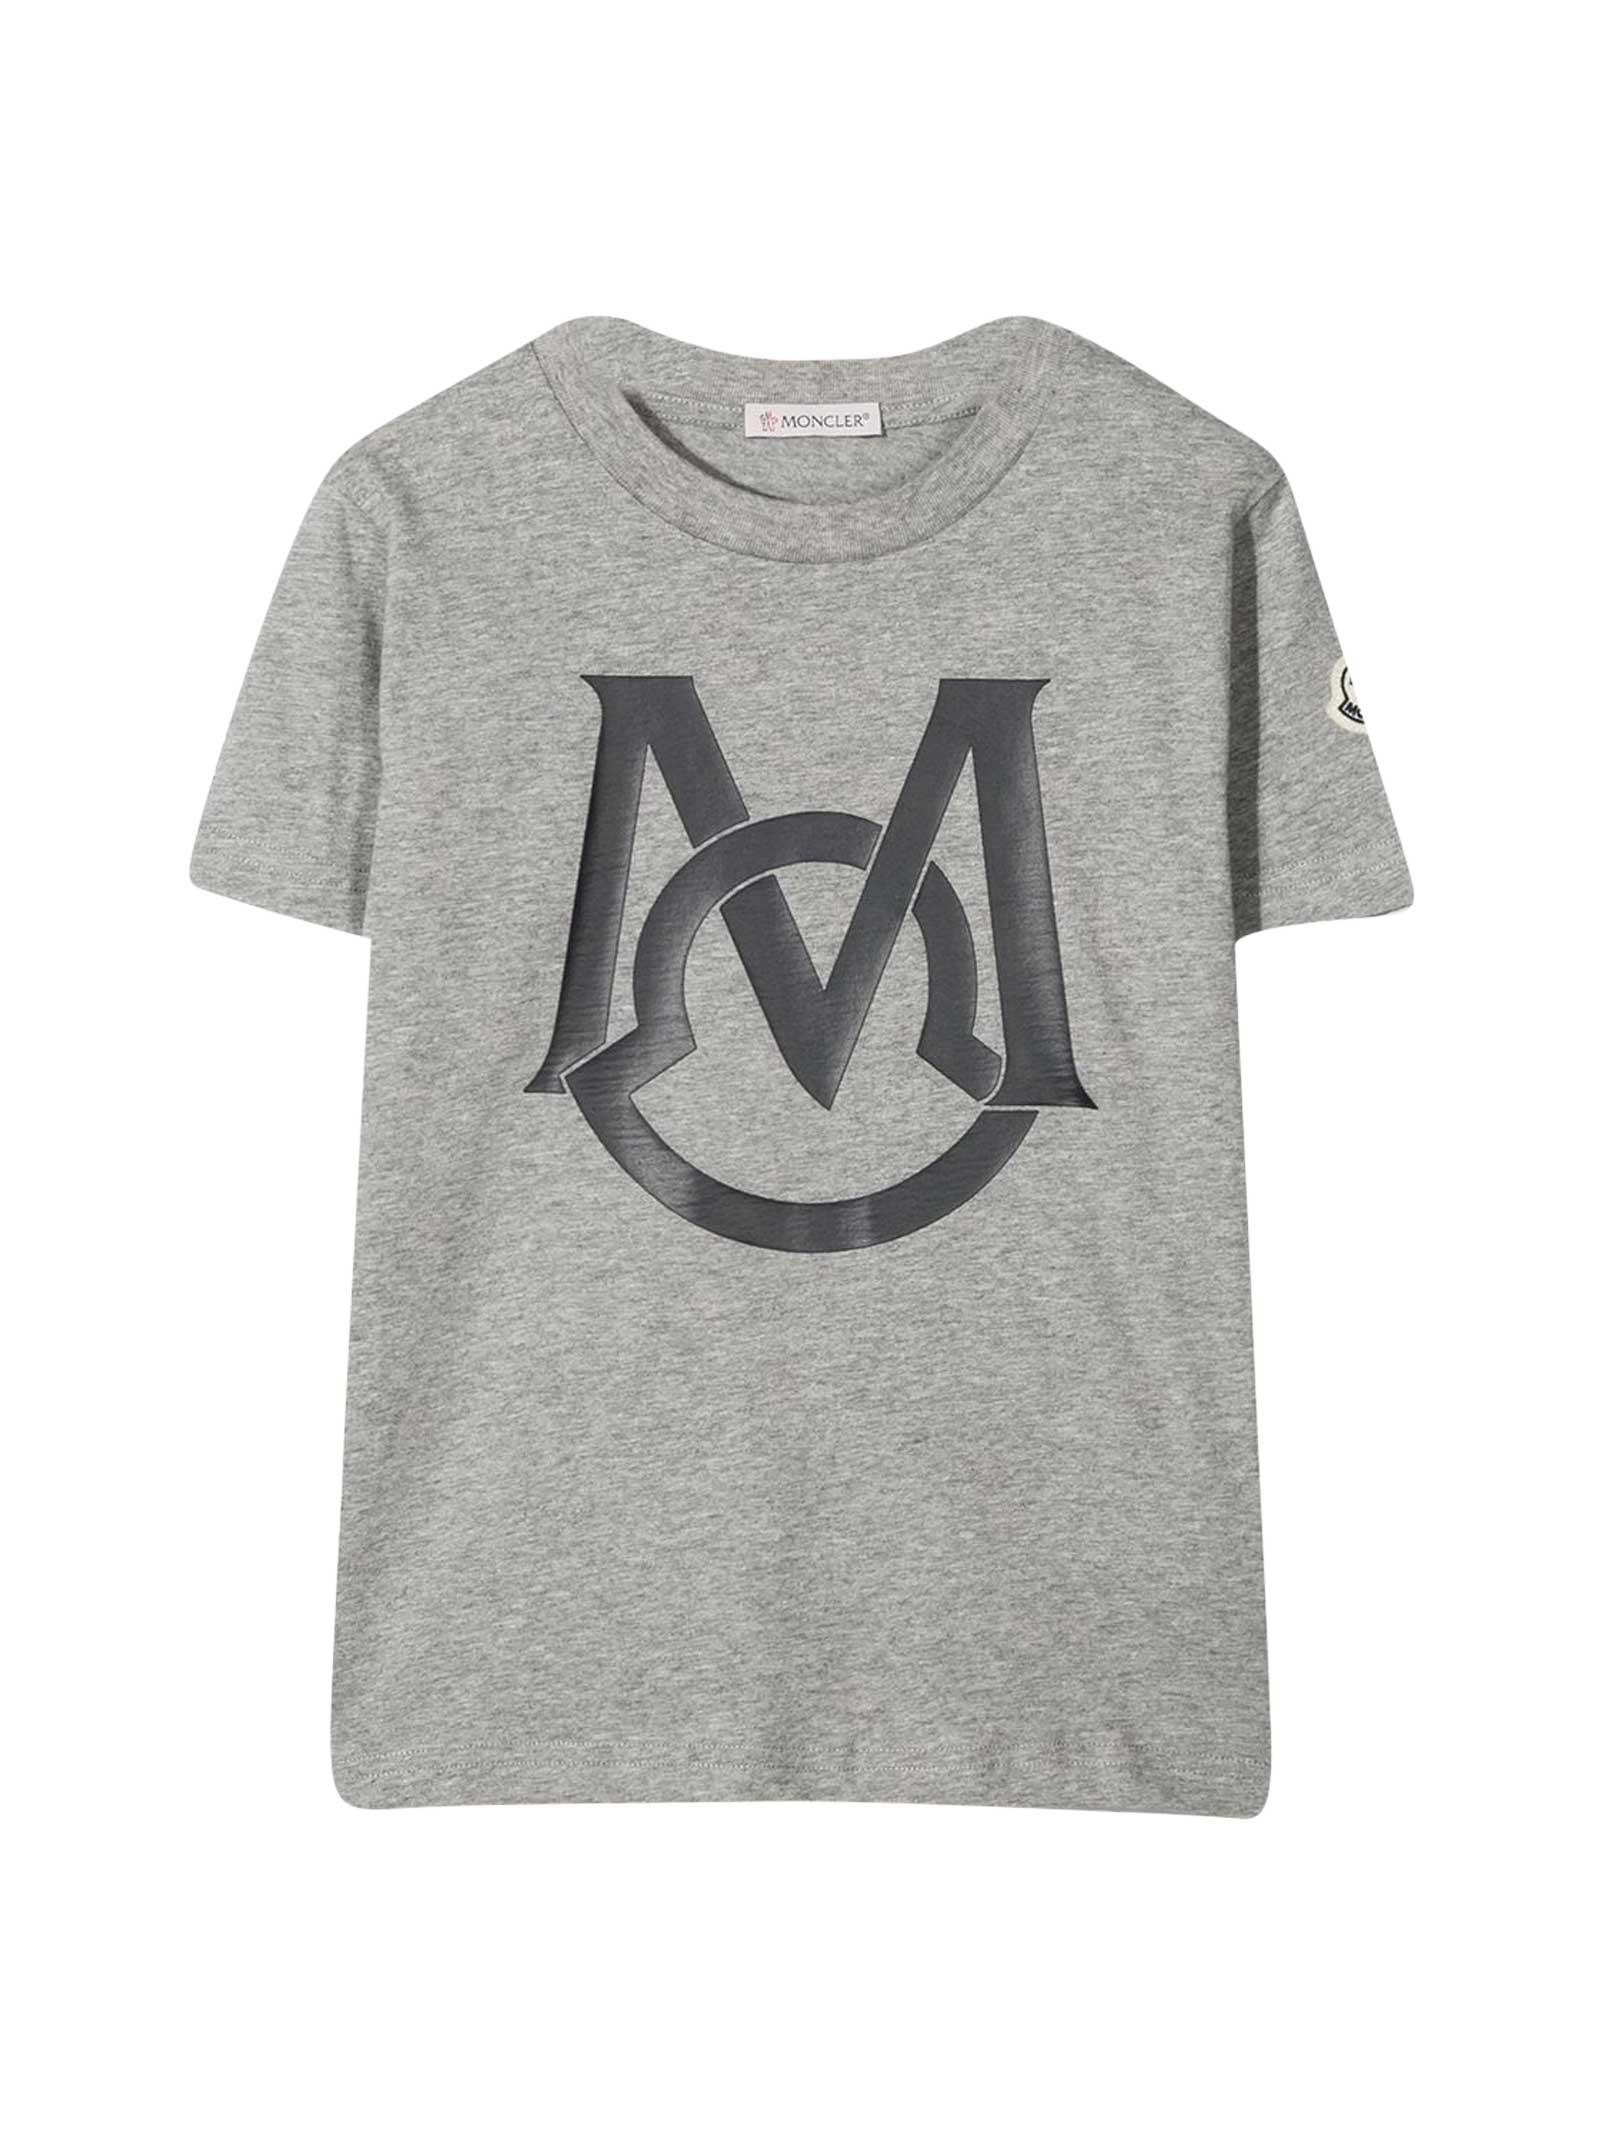 Moncler Kids' Grey T-shirt With Print In Unica